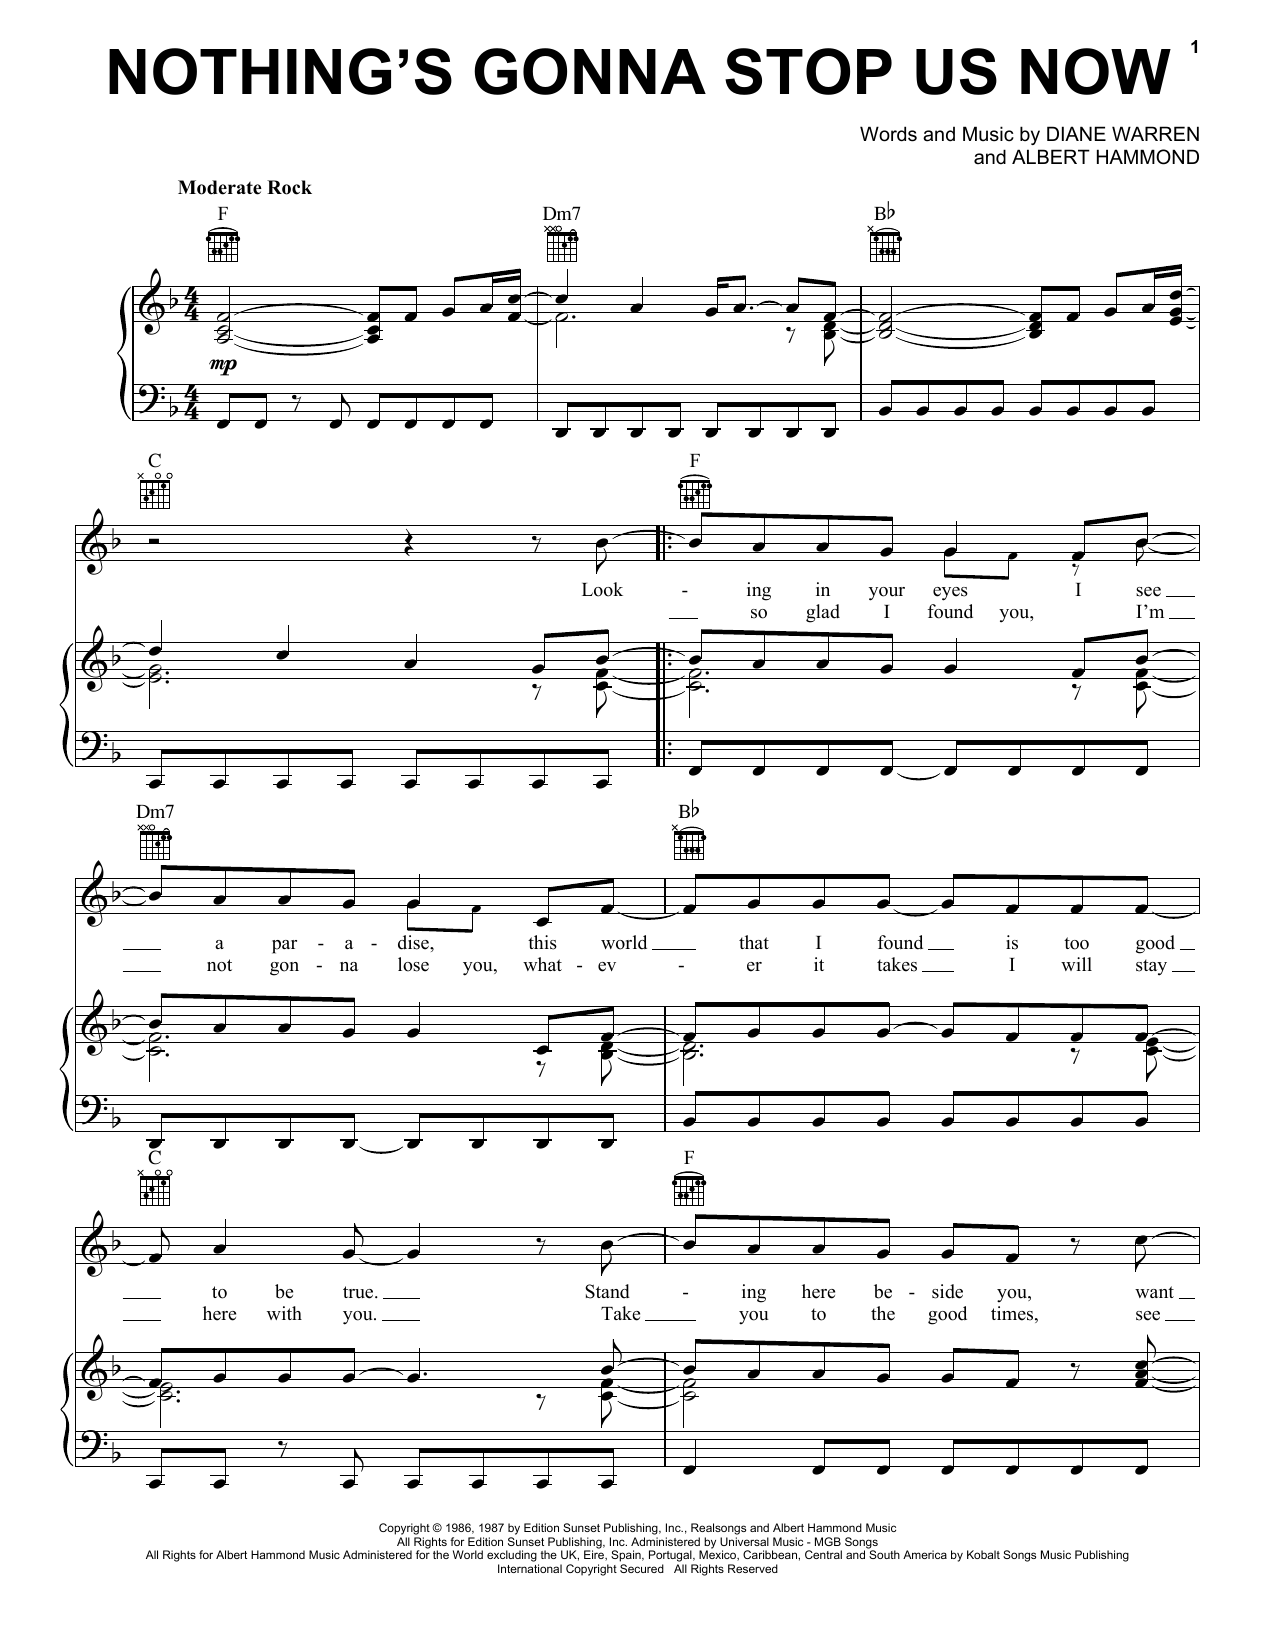 Starship Nothing's Gonna Stop Us Now sheet music notes and chords. Download Printable PDF.